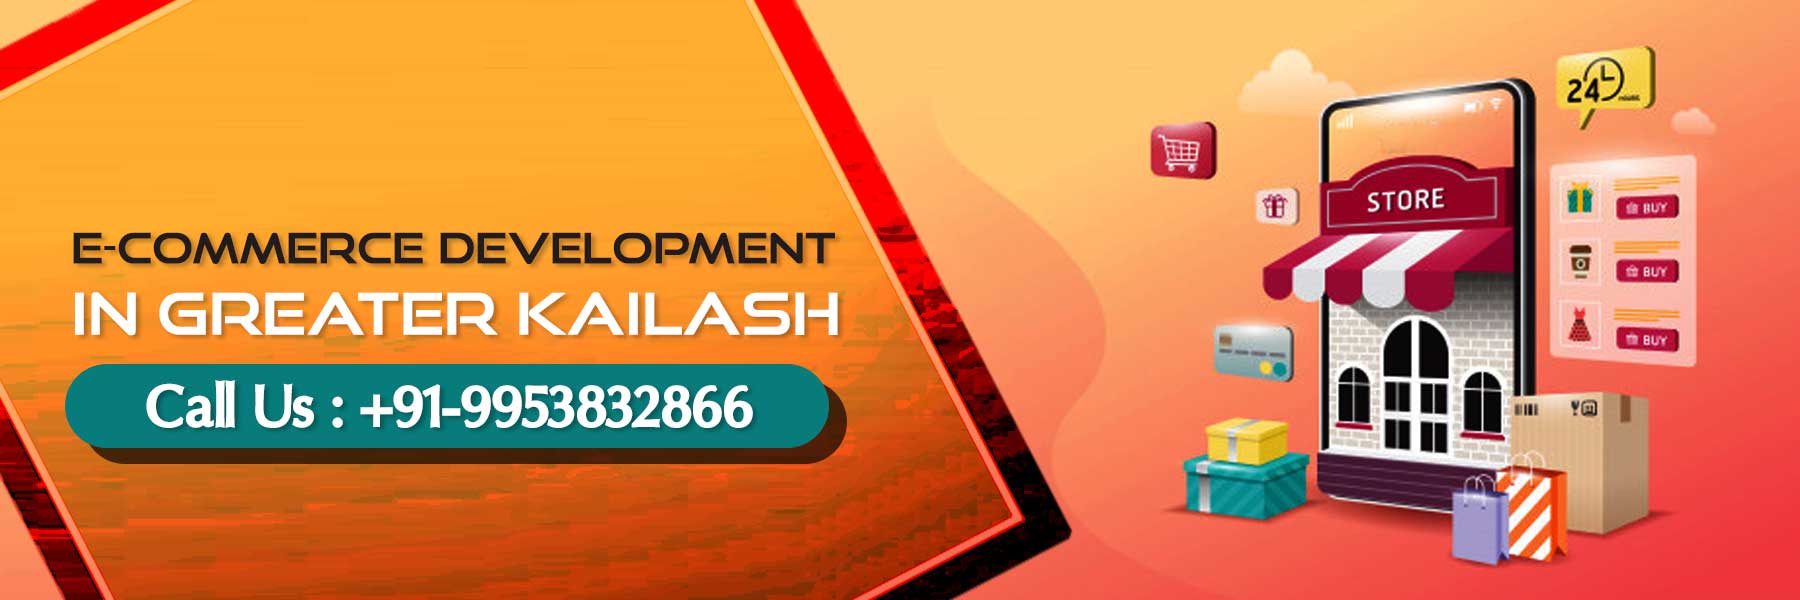 ecommerce development in Greater Kailash